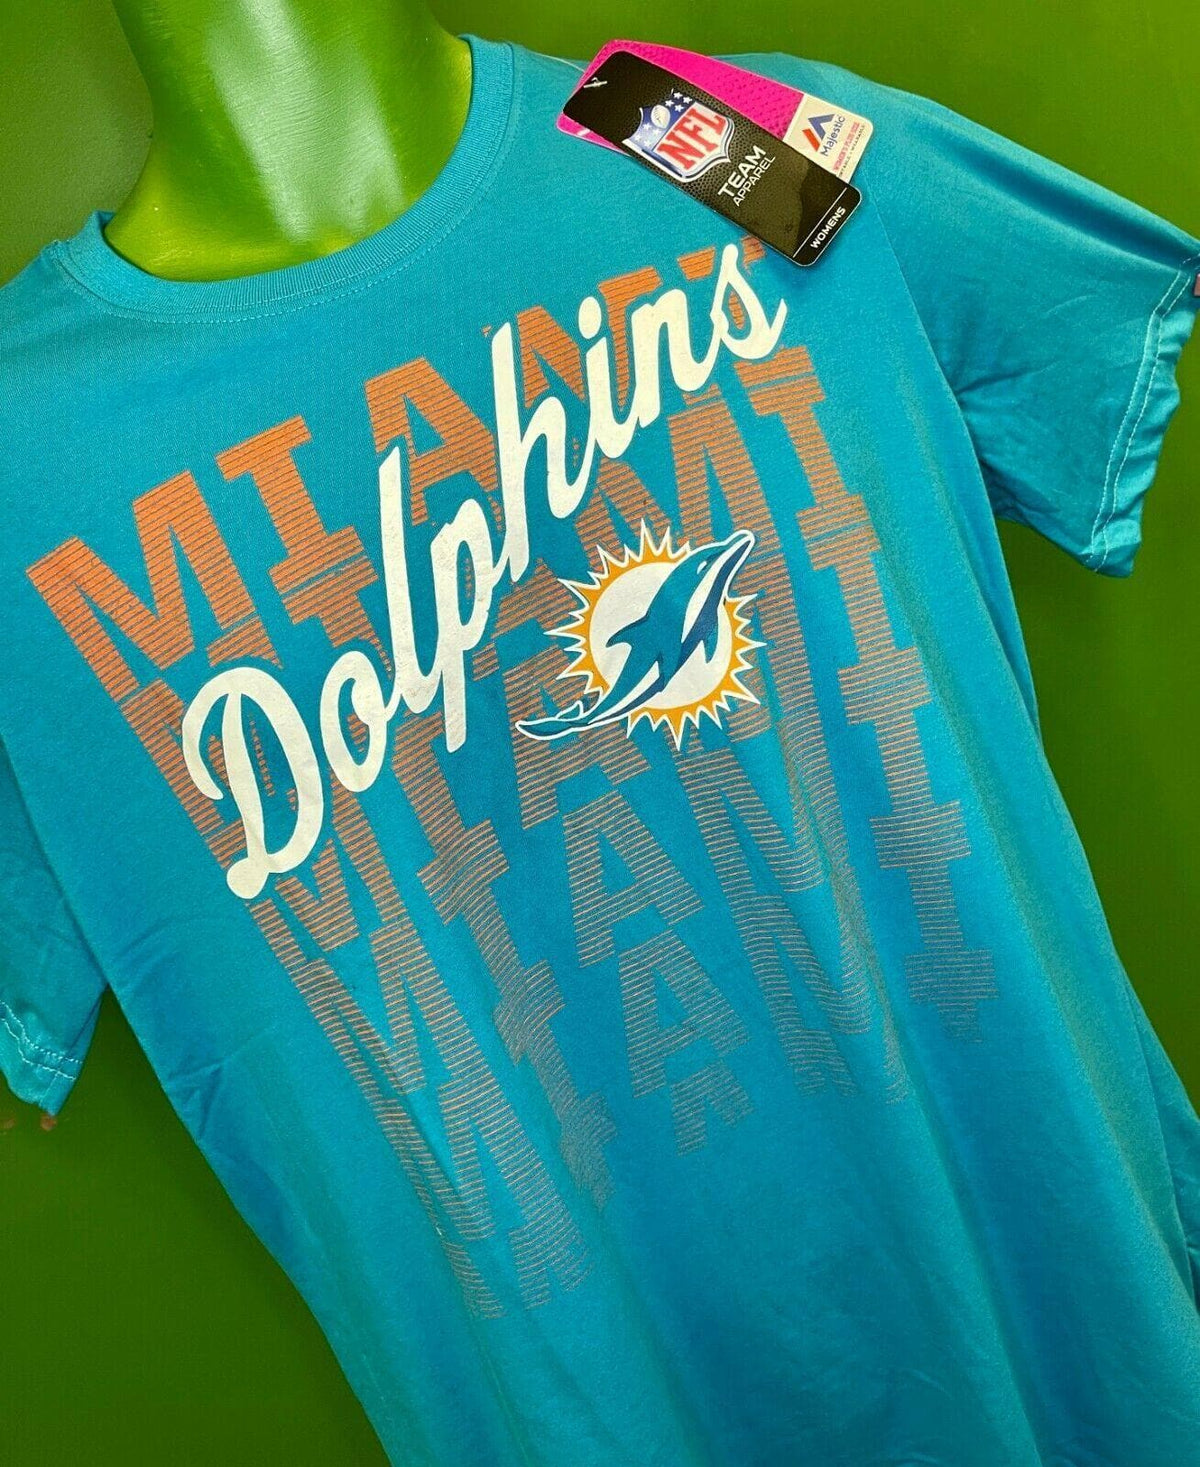 NFL Miami Dolphins Majestic Women's Plus Size T-Shirt Large NWT